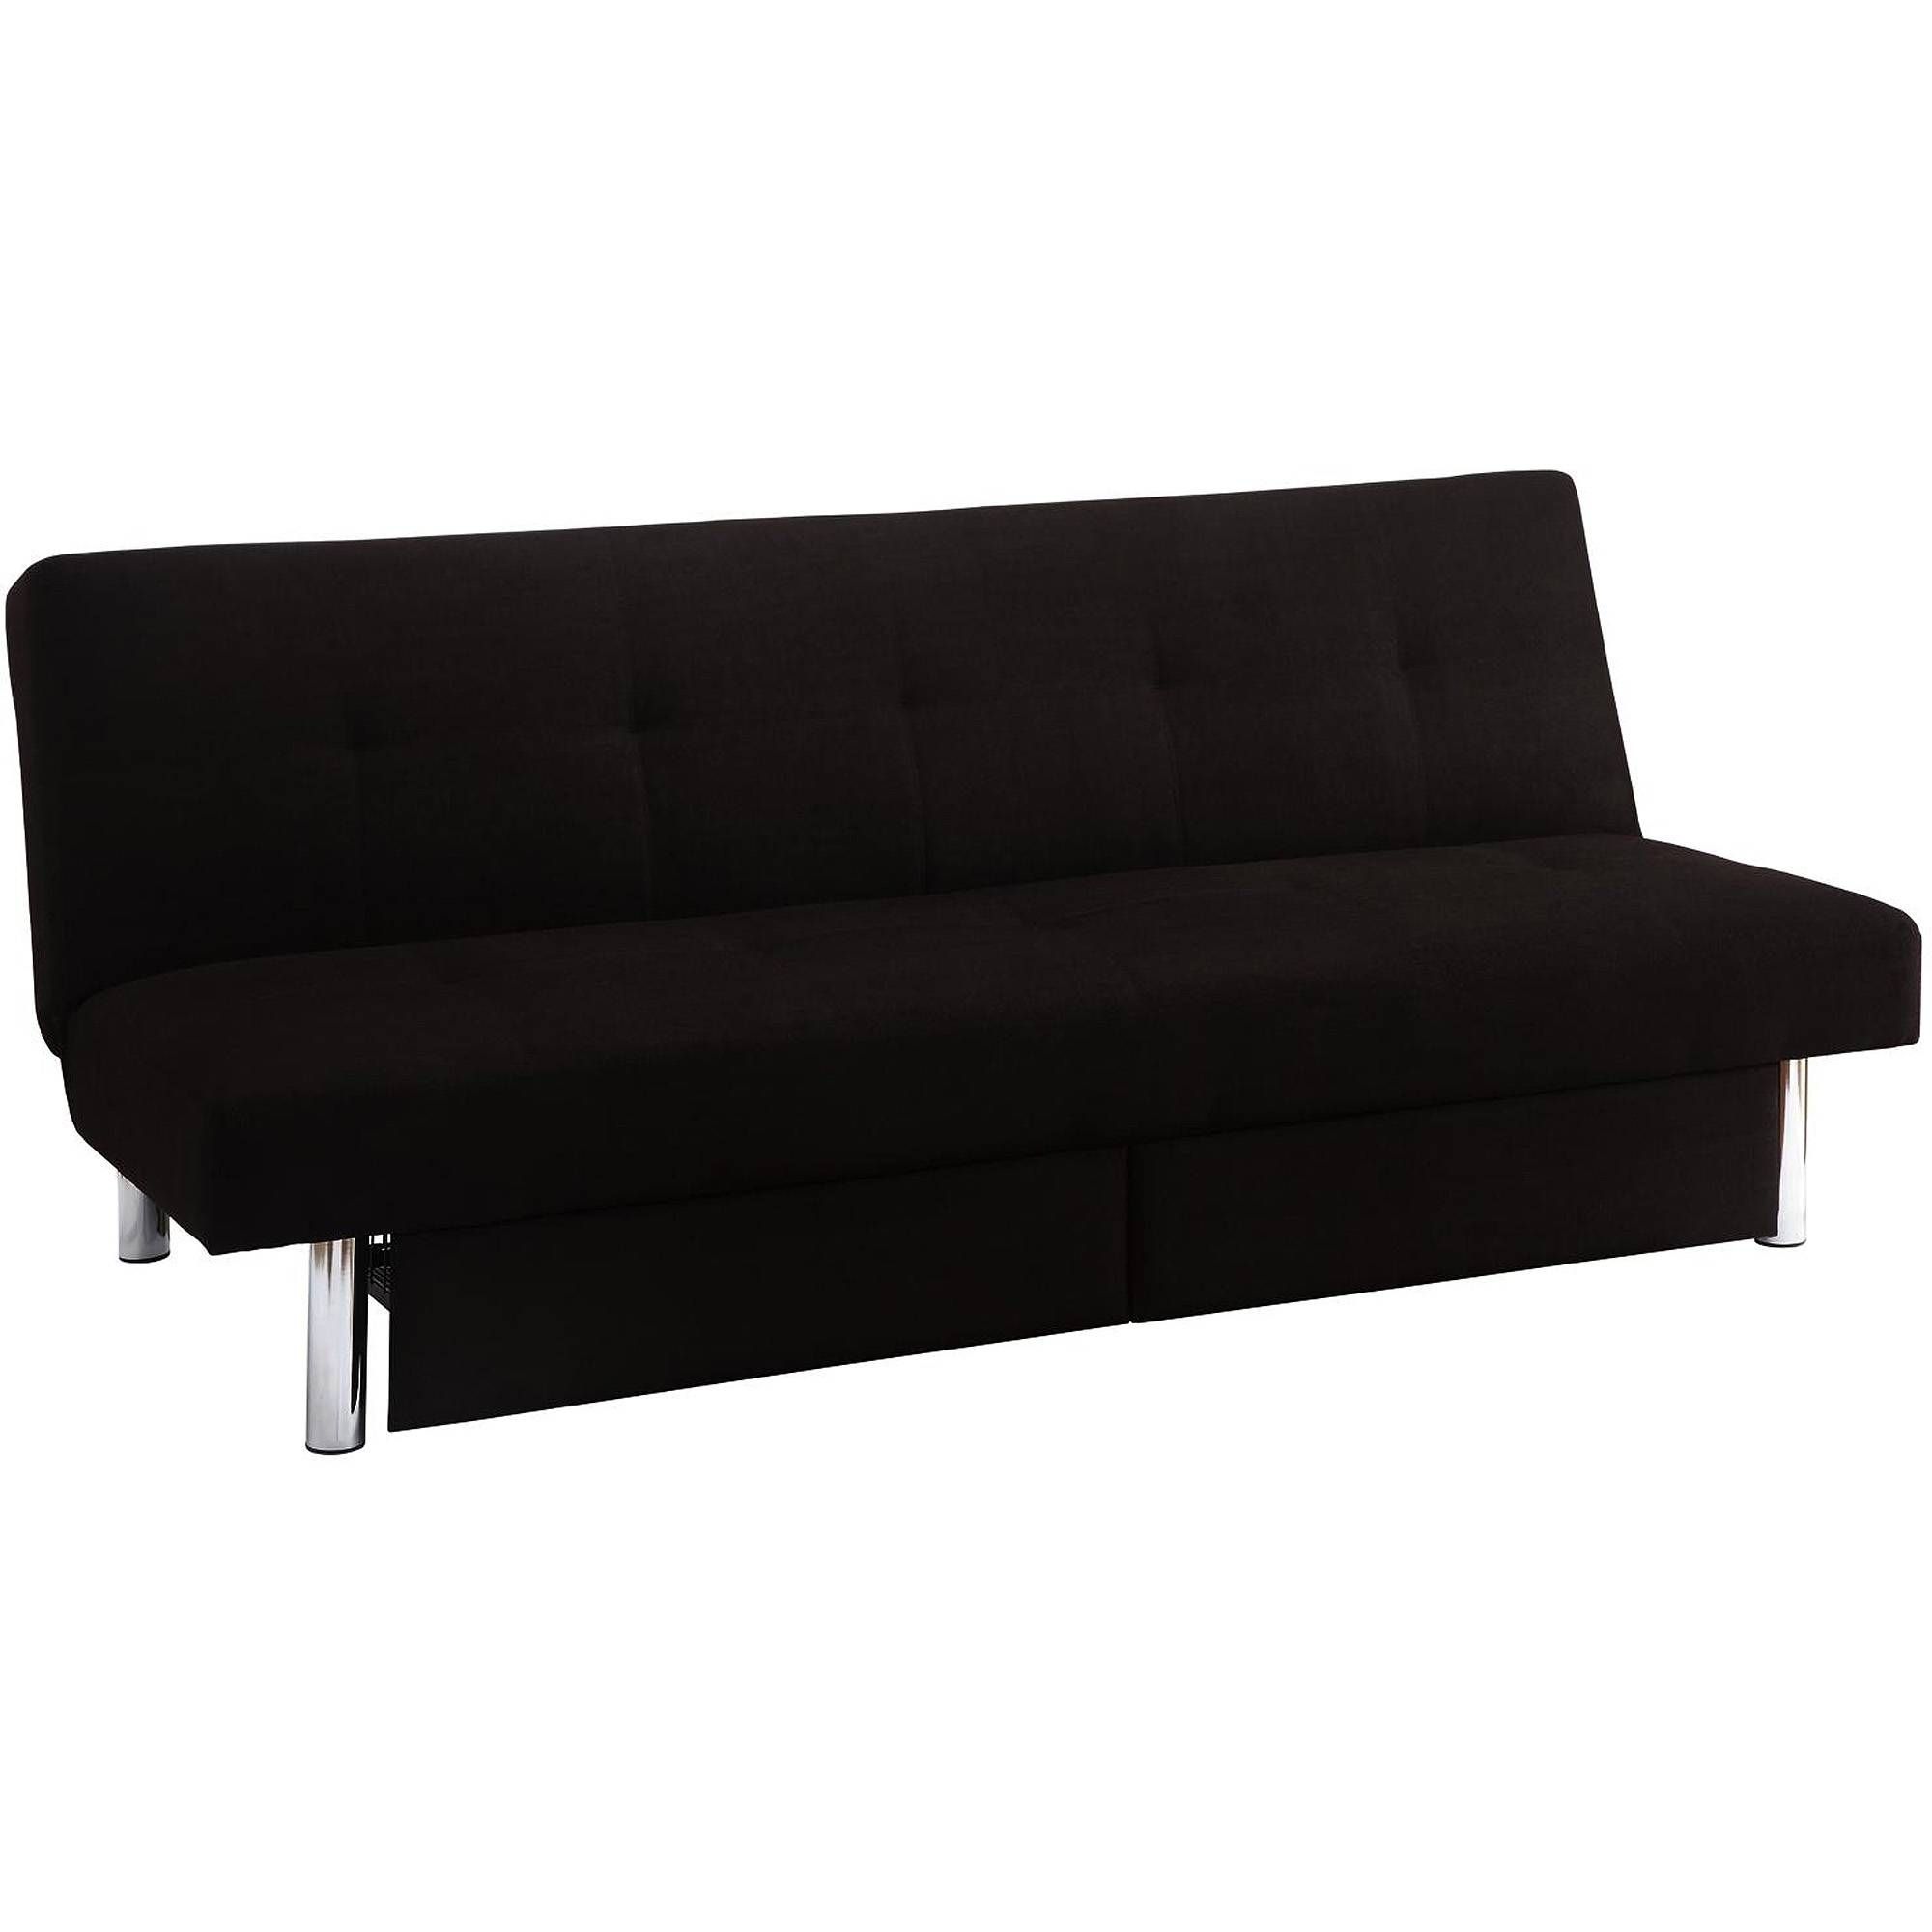 Furniture: Leather Futon Walmart With Modern Look And Stylish With Big Lots Sofa Bed (View 27 of 30)